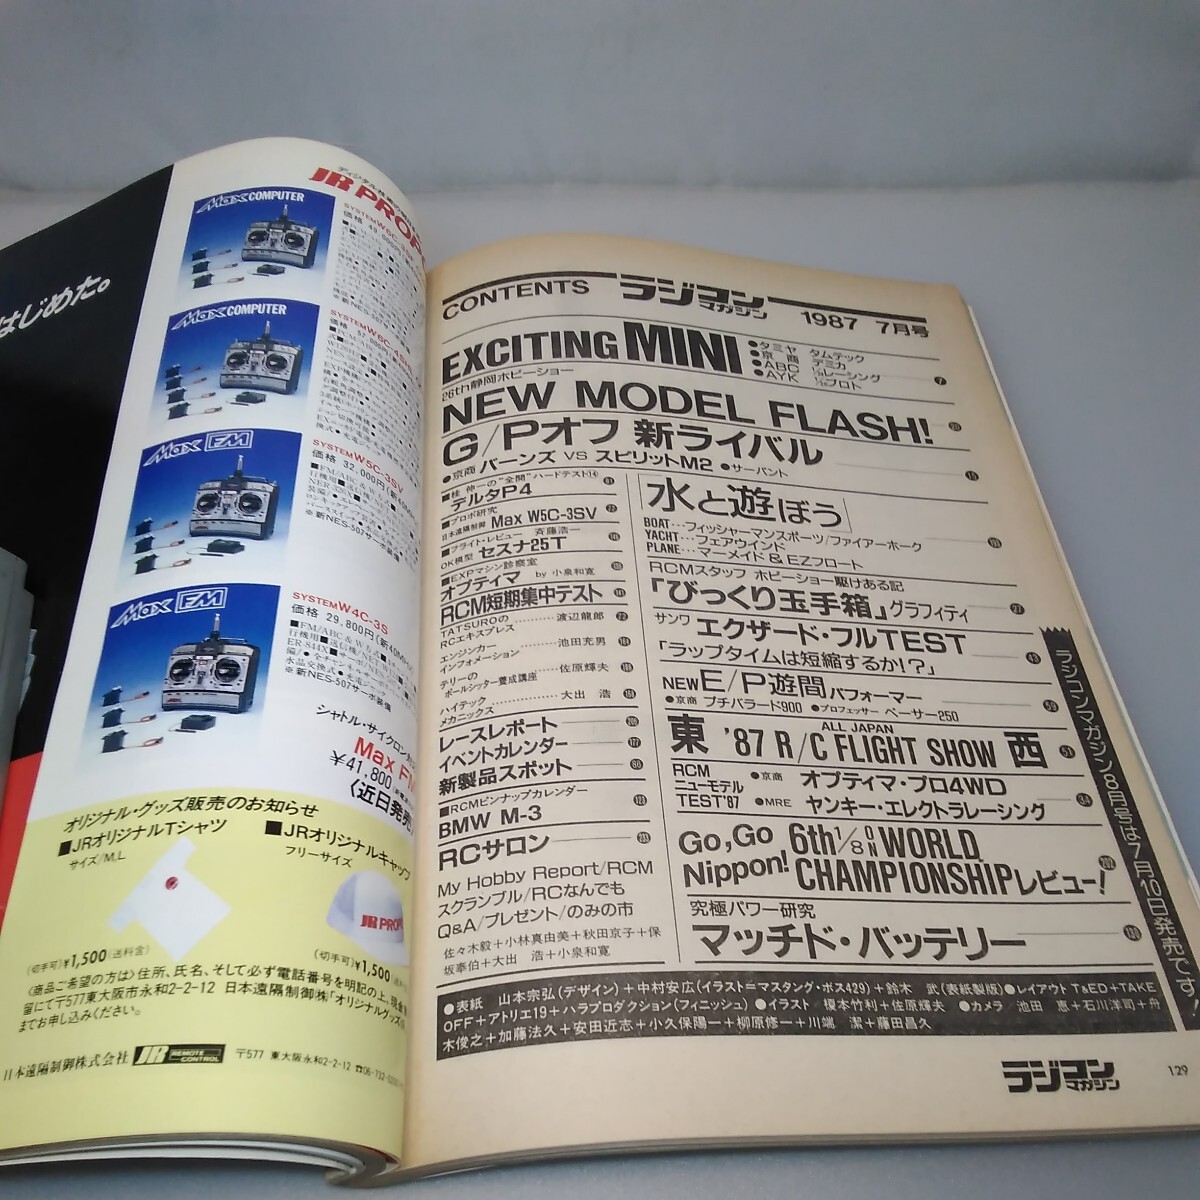 [ that time thing ] radio-controller magazine *1987 year 7 month number no. 10 volume no. 7 number * Showa era 62 year 7 month issue *RCmagazine* Yaesu publish * free shipping * immediately shipping * rare * the whole exhibiting 